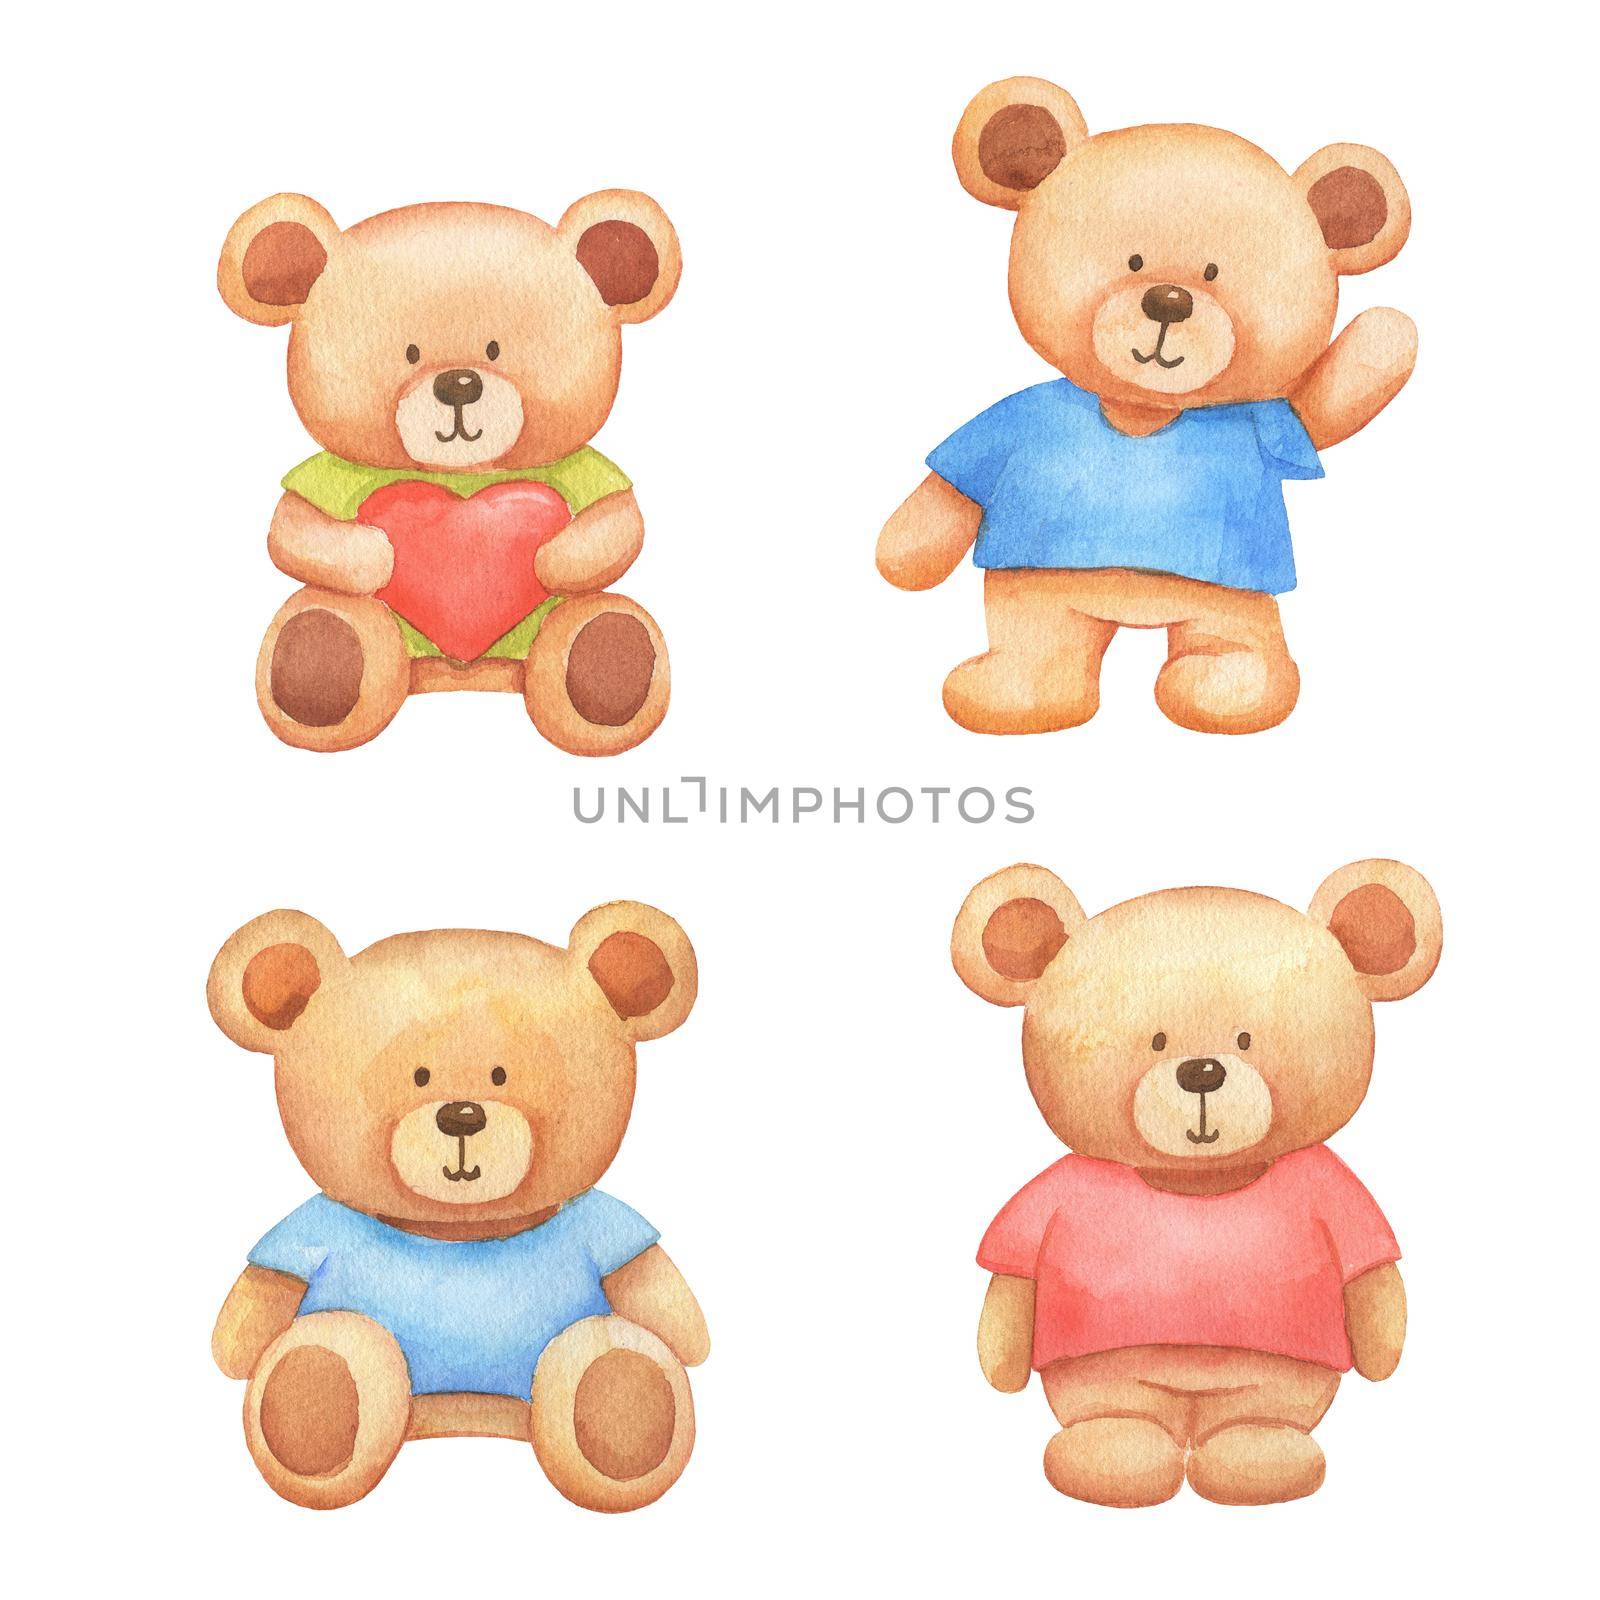 Watercolor set of cute bears toys in T-shirt. Sitting bear with heart for Valentine's Day cards or baby shower